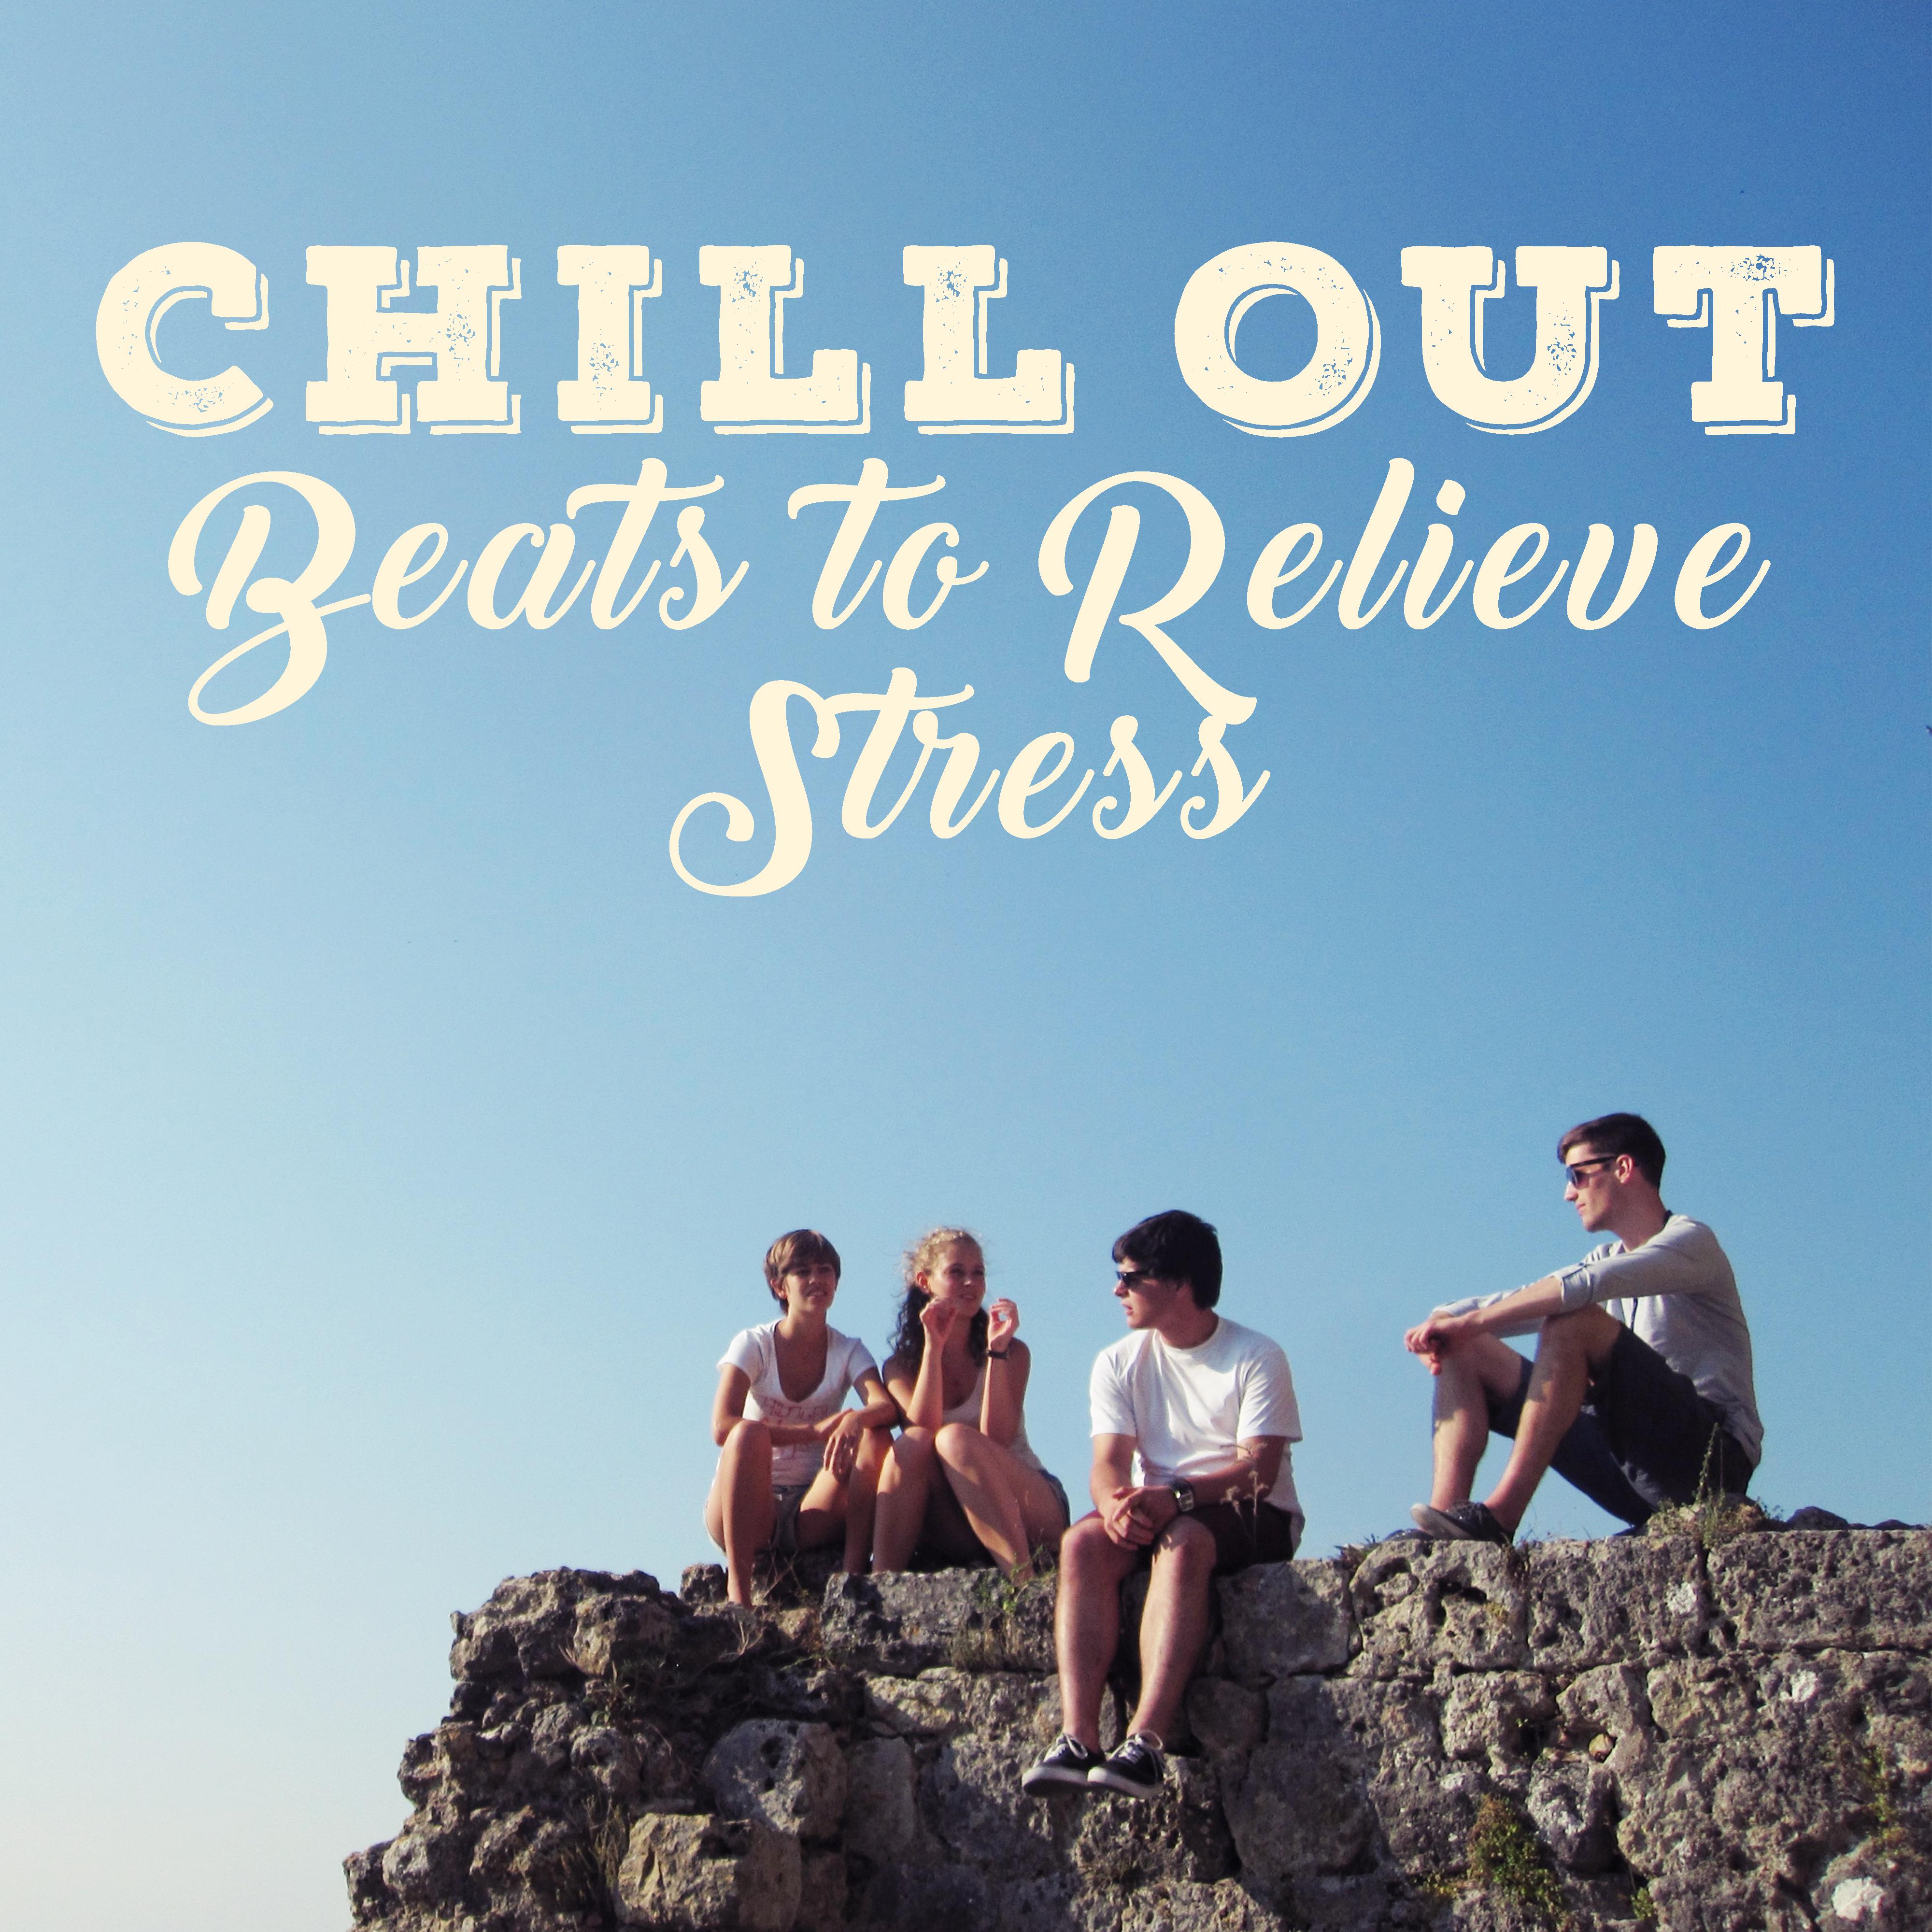 Chill Out Beats to Relieve Stress – Calming Sounds to Rest, Easy Listening, Summer Vibes, Mind Calmness